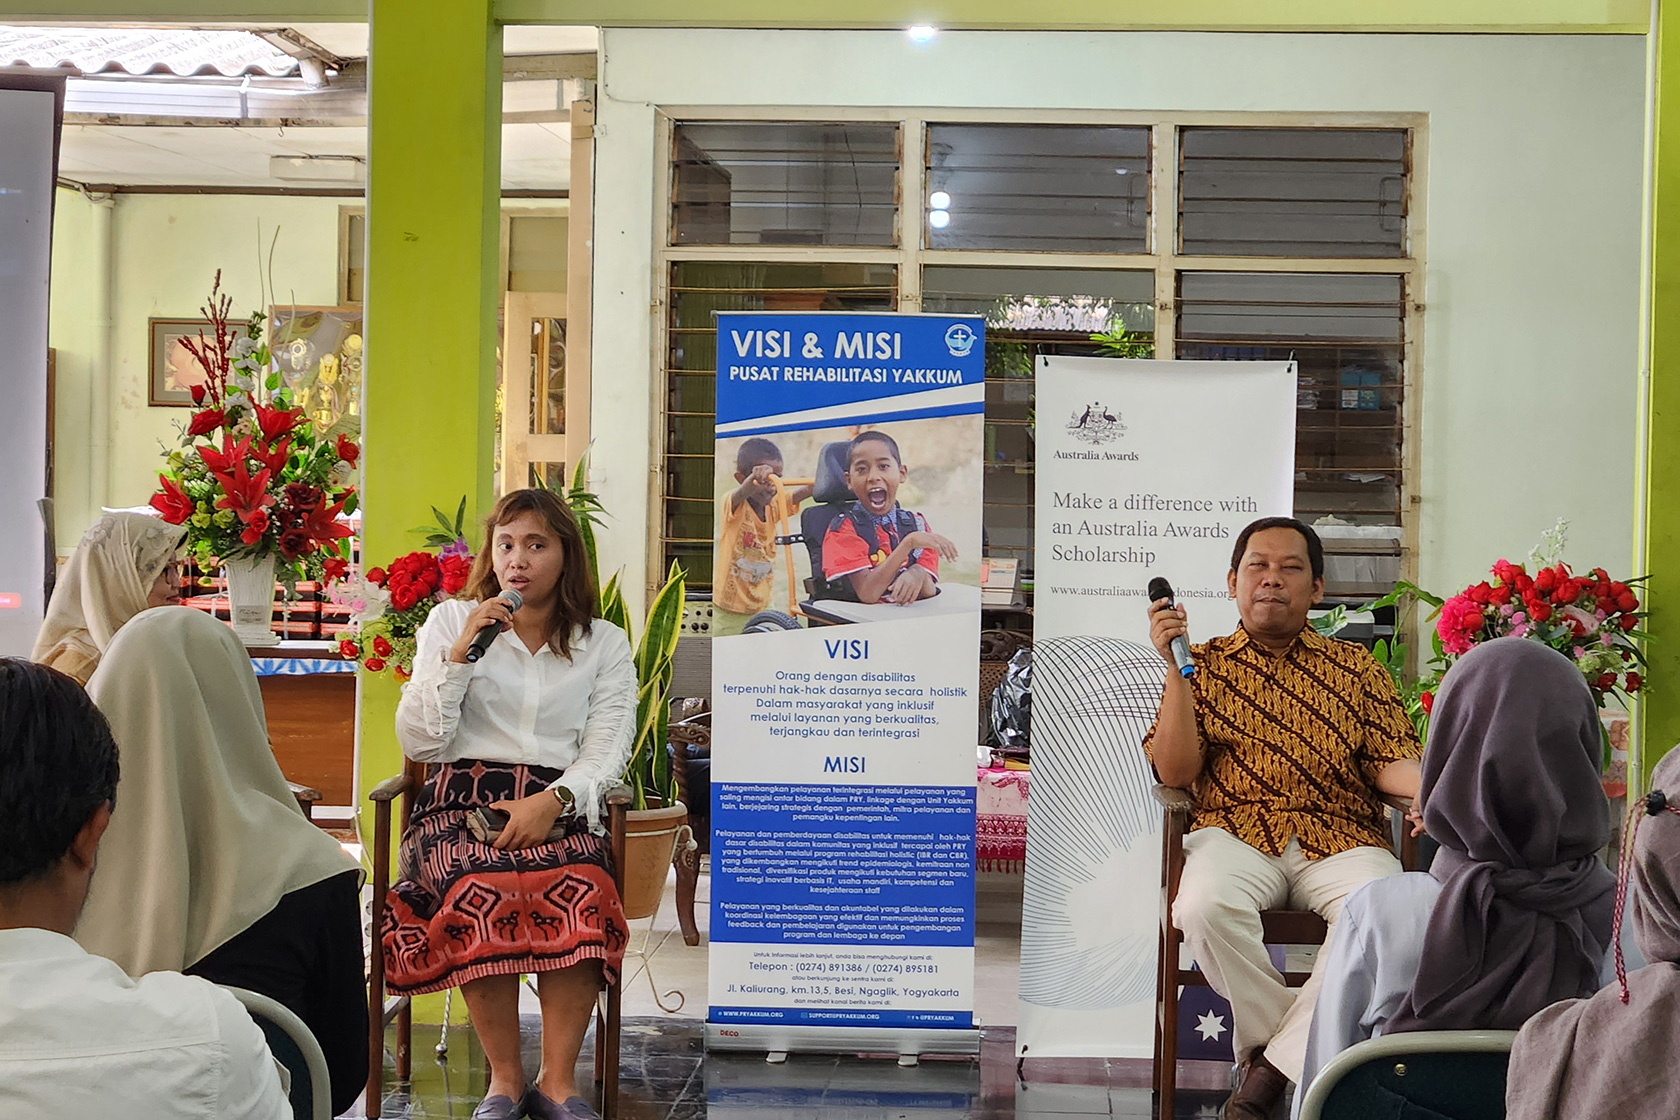 The speakers share information about the Australia Awards Scholarships at an Information Session organised by Australia Awards in Indonesia in collaboration with YAKKUM.